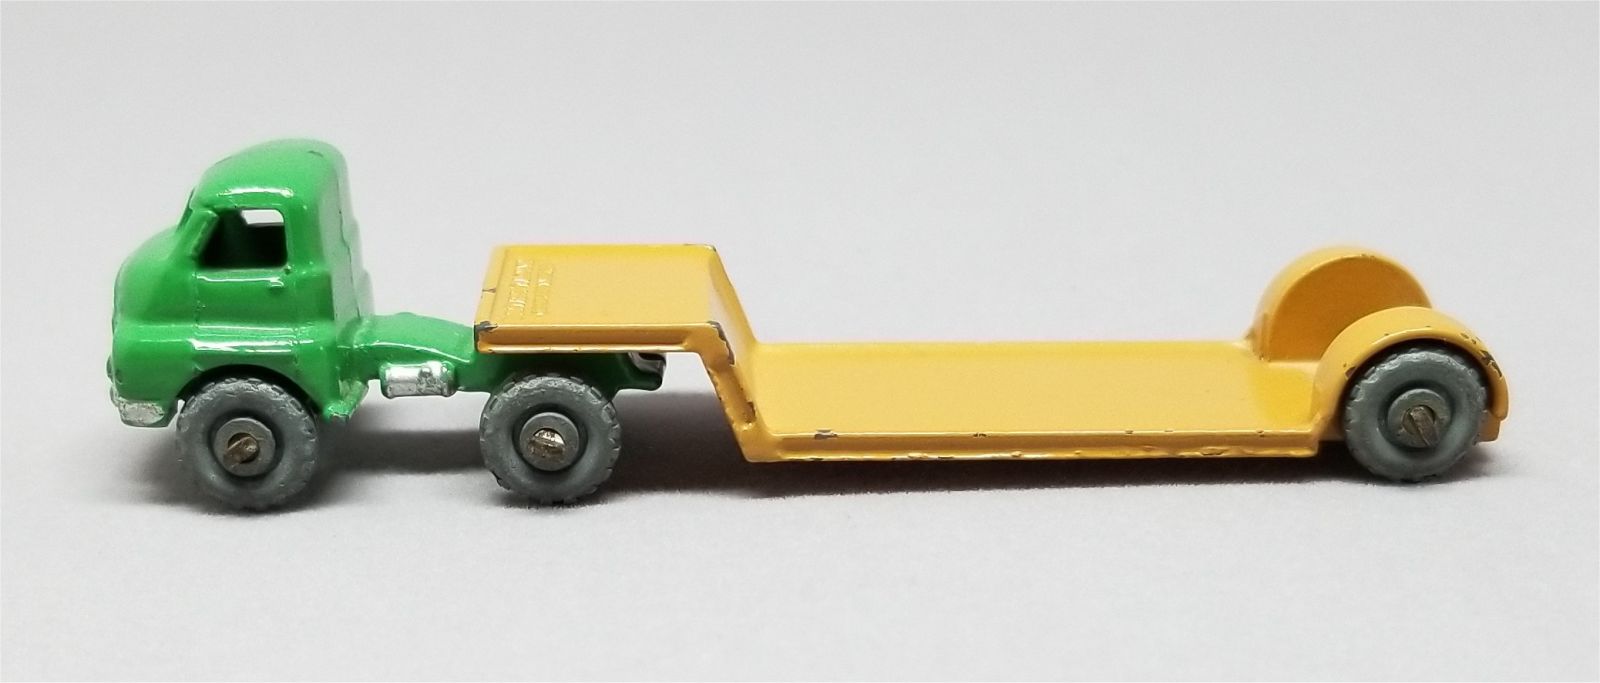 Illustration for article titled [REVIEW] Lesney Matchbox Bedford Low Loader - the small one